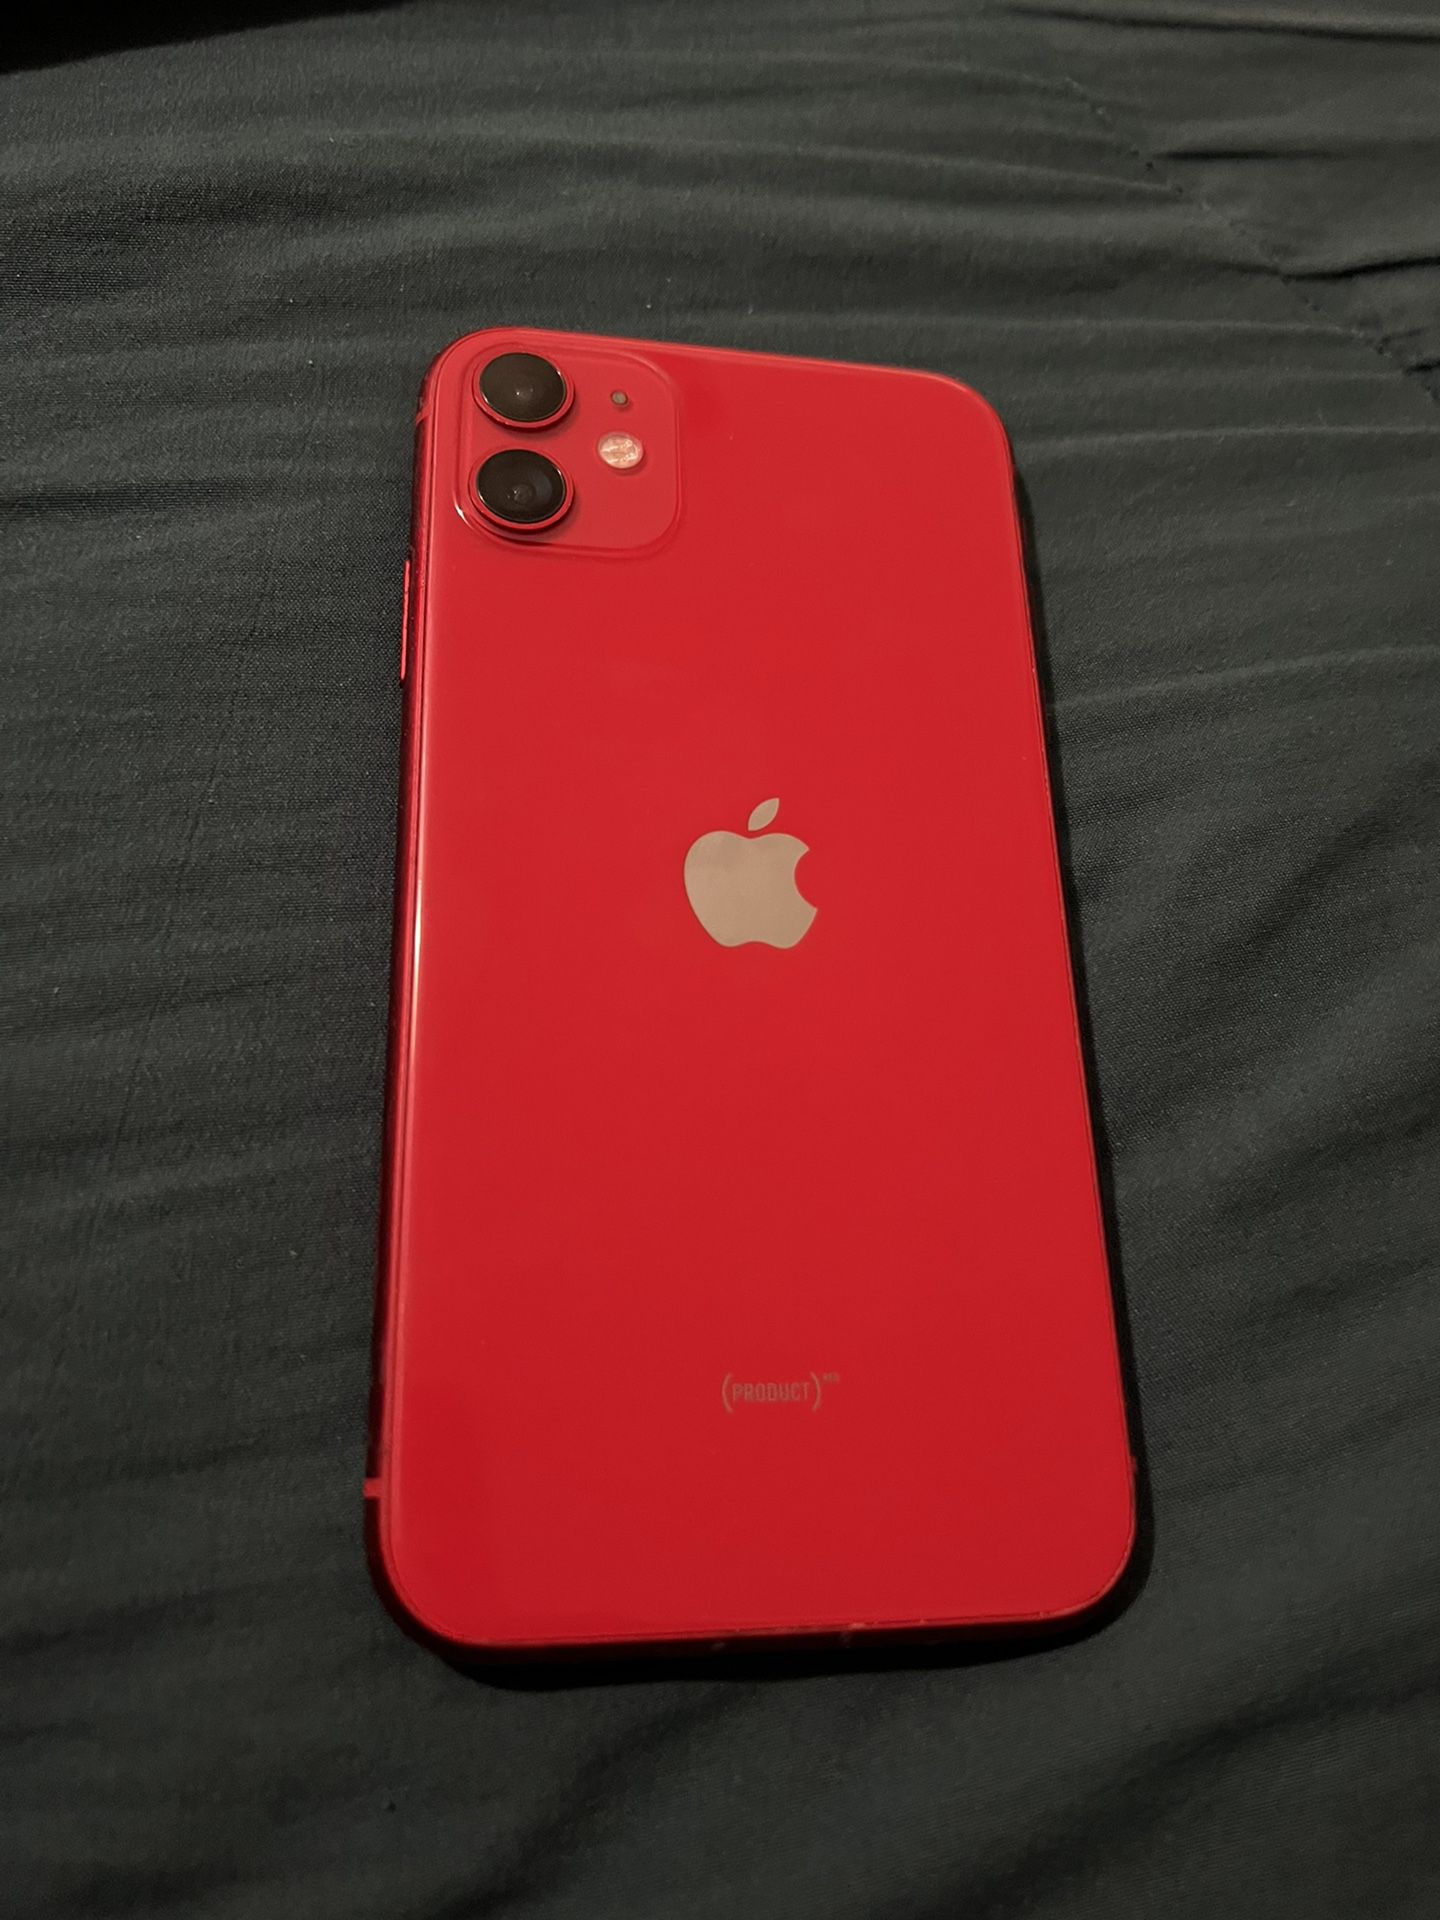 Apple iPhone 11 64gb Product Red for Sale in Fontana, CA - OfferUp